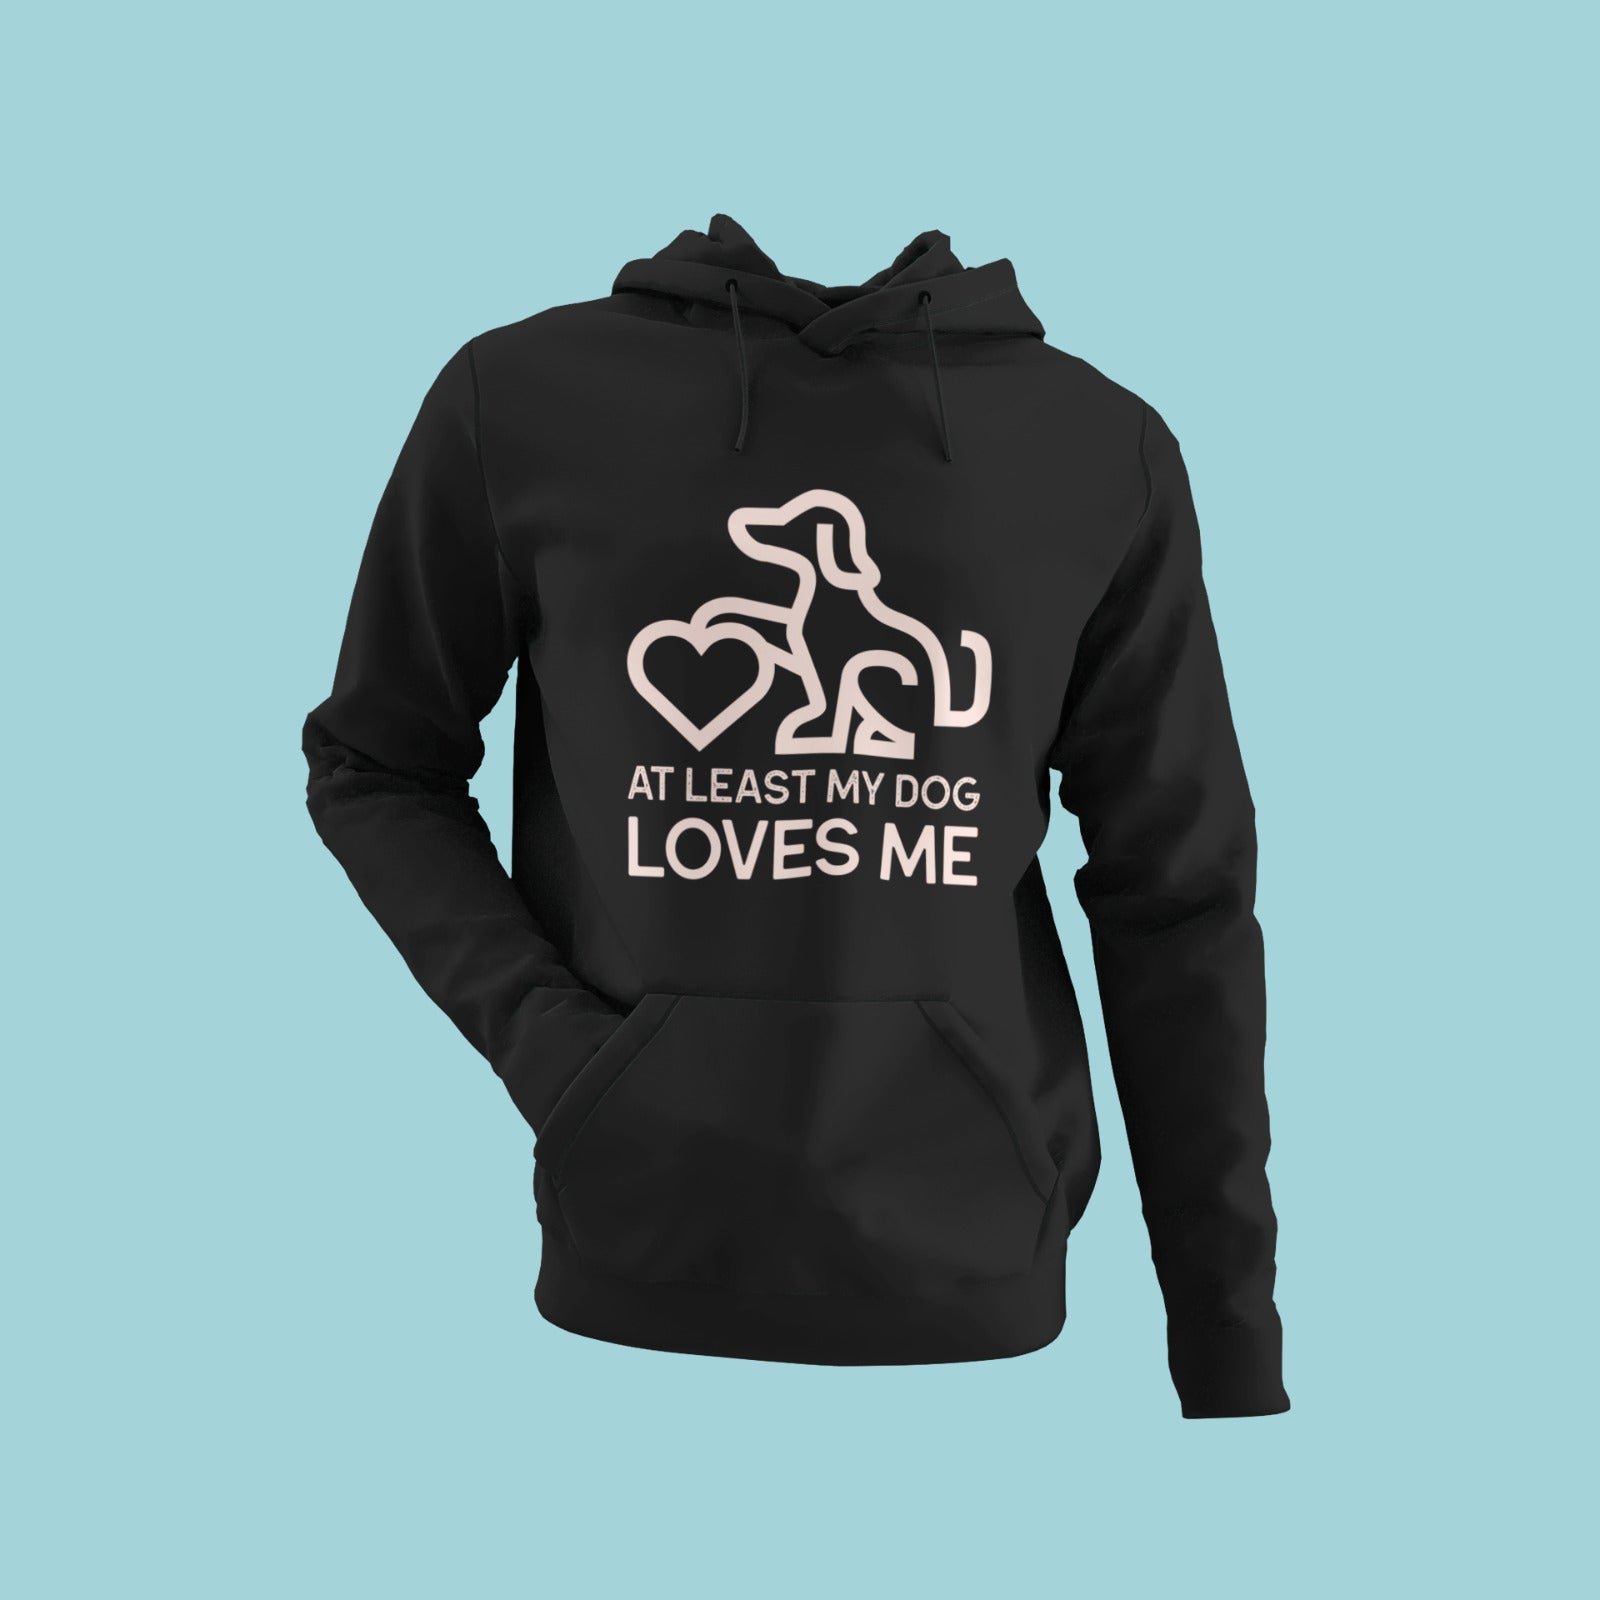 Express your love for your furry best friend with this black hoodie featuring a line drawing of a sitting dog with one paw on a heart and the slogan "at least my dog loves me". The comfortable material and eye-catching design make it perfect for everyday wear. Order now to add some warmth and love to your wardrobe!